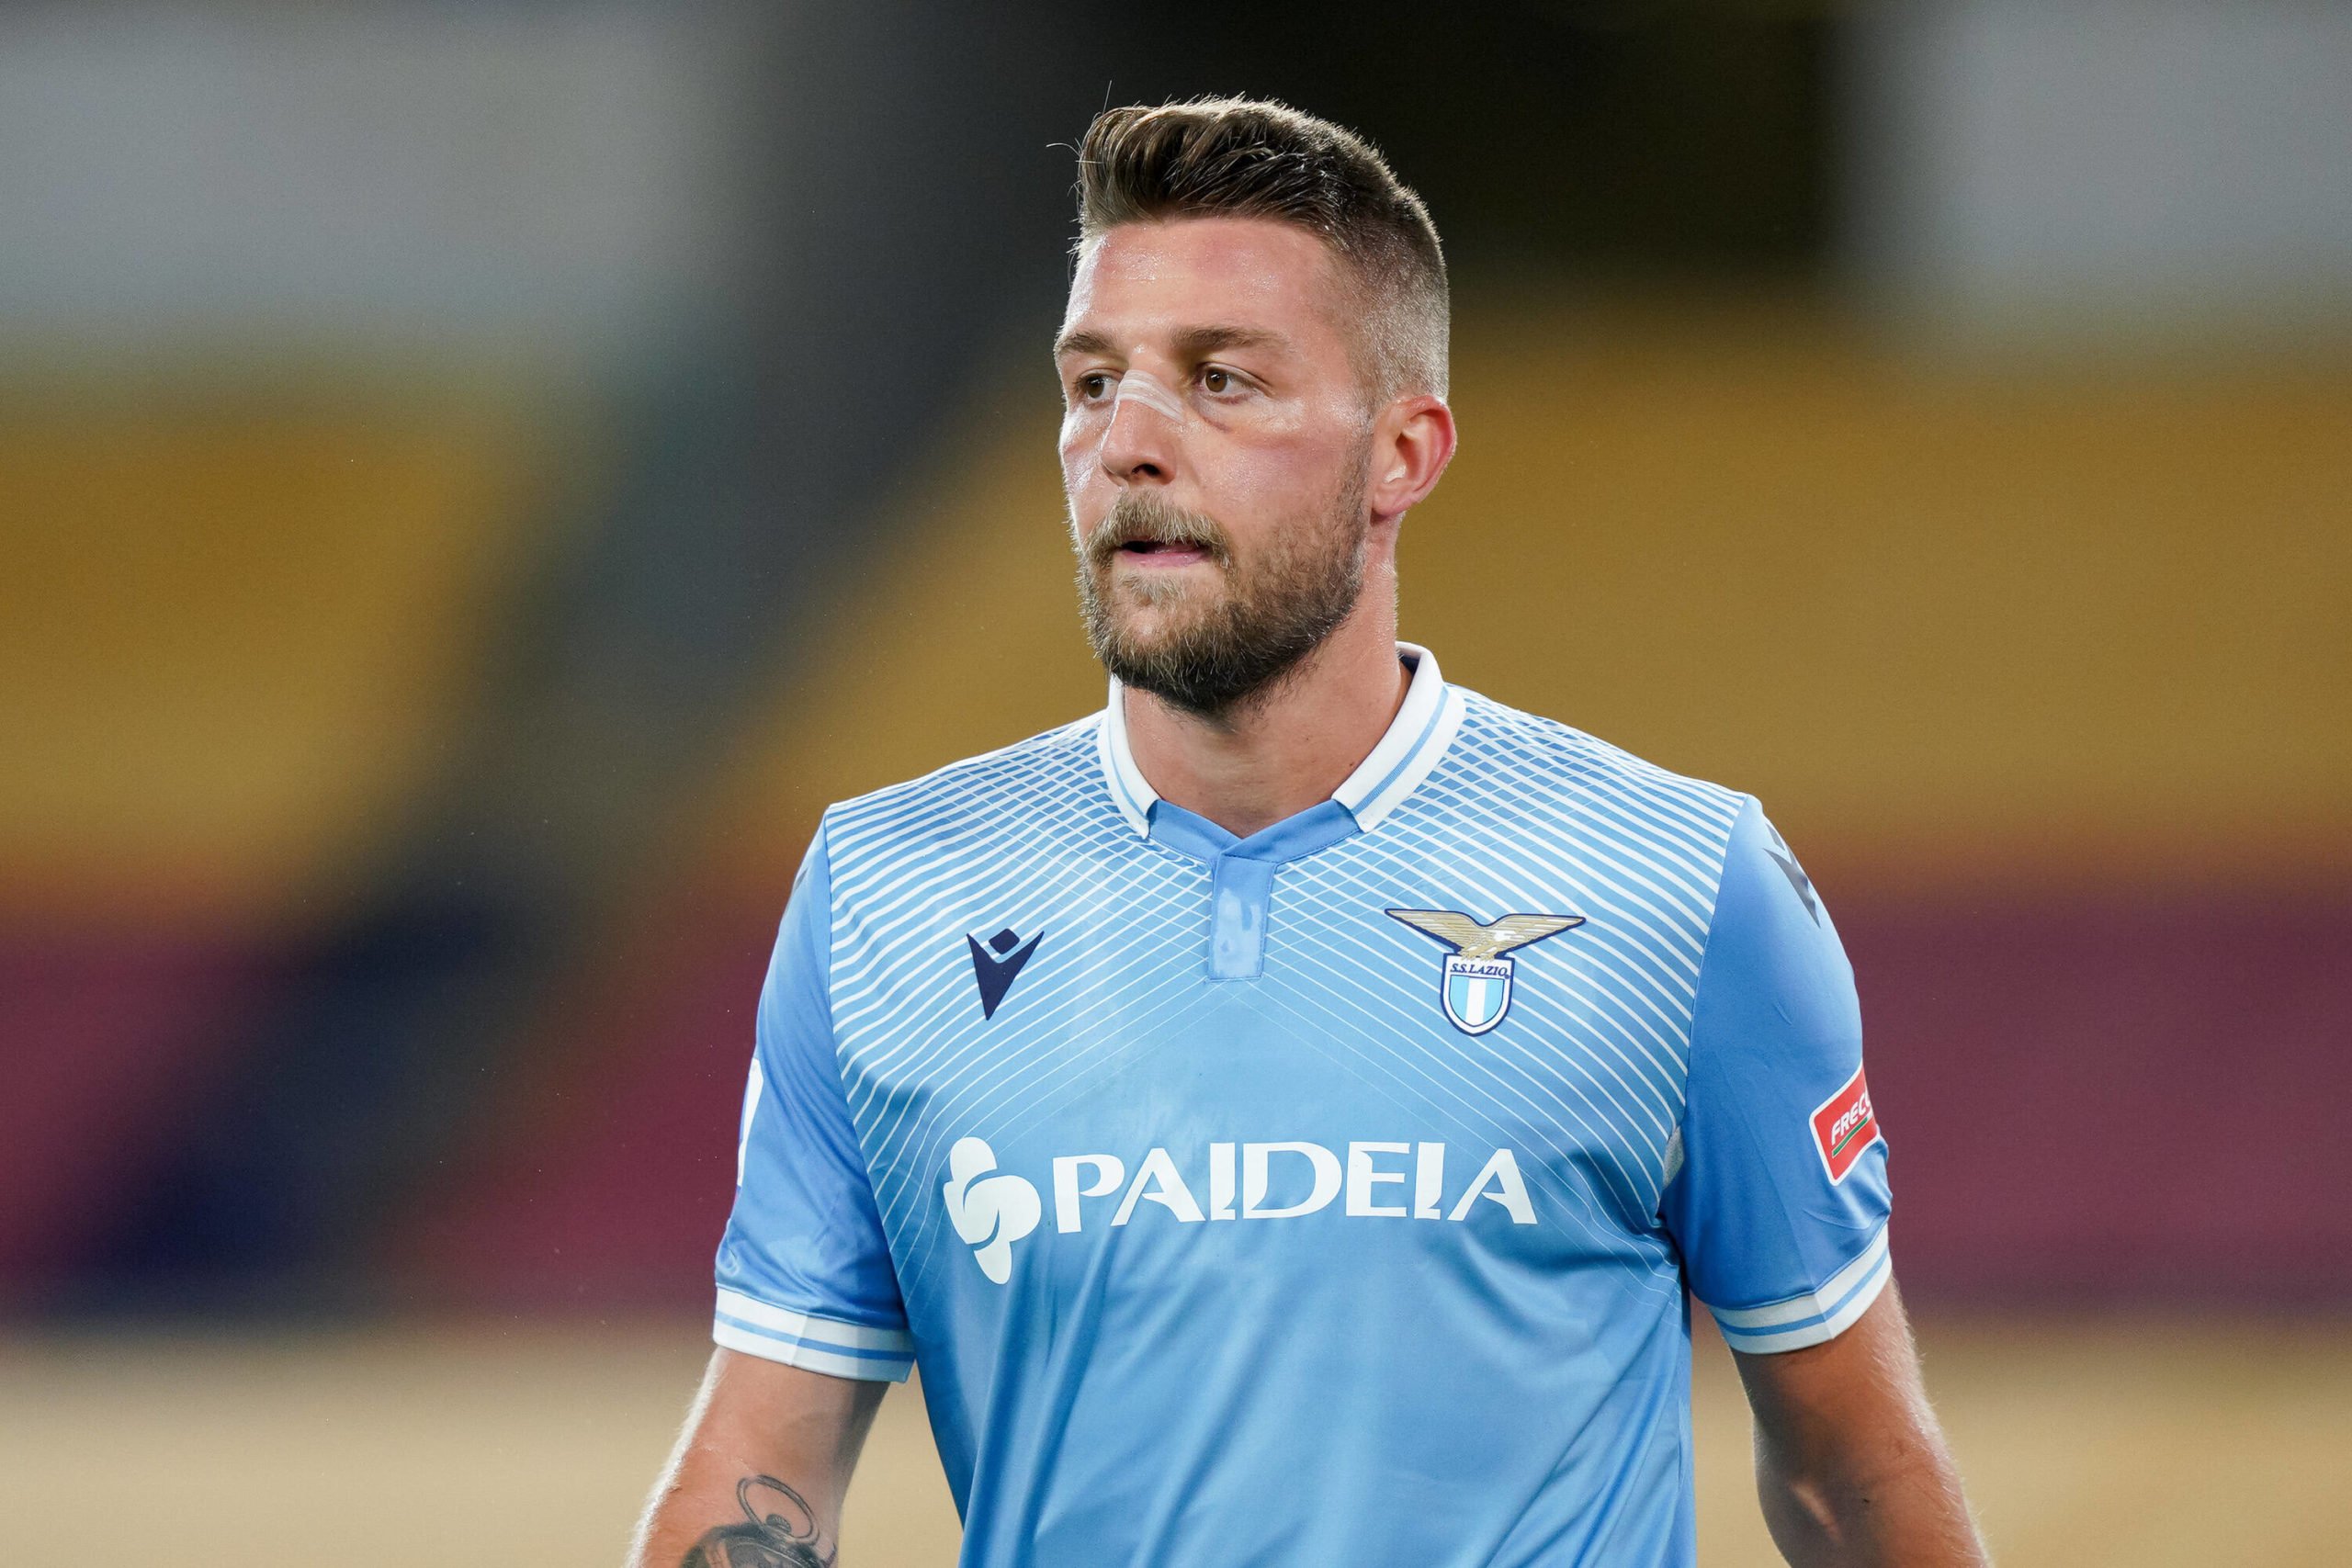 Liverpool showing interest in recruiting Milinkovic-Savic who is seen in the photo